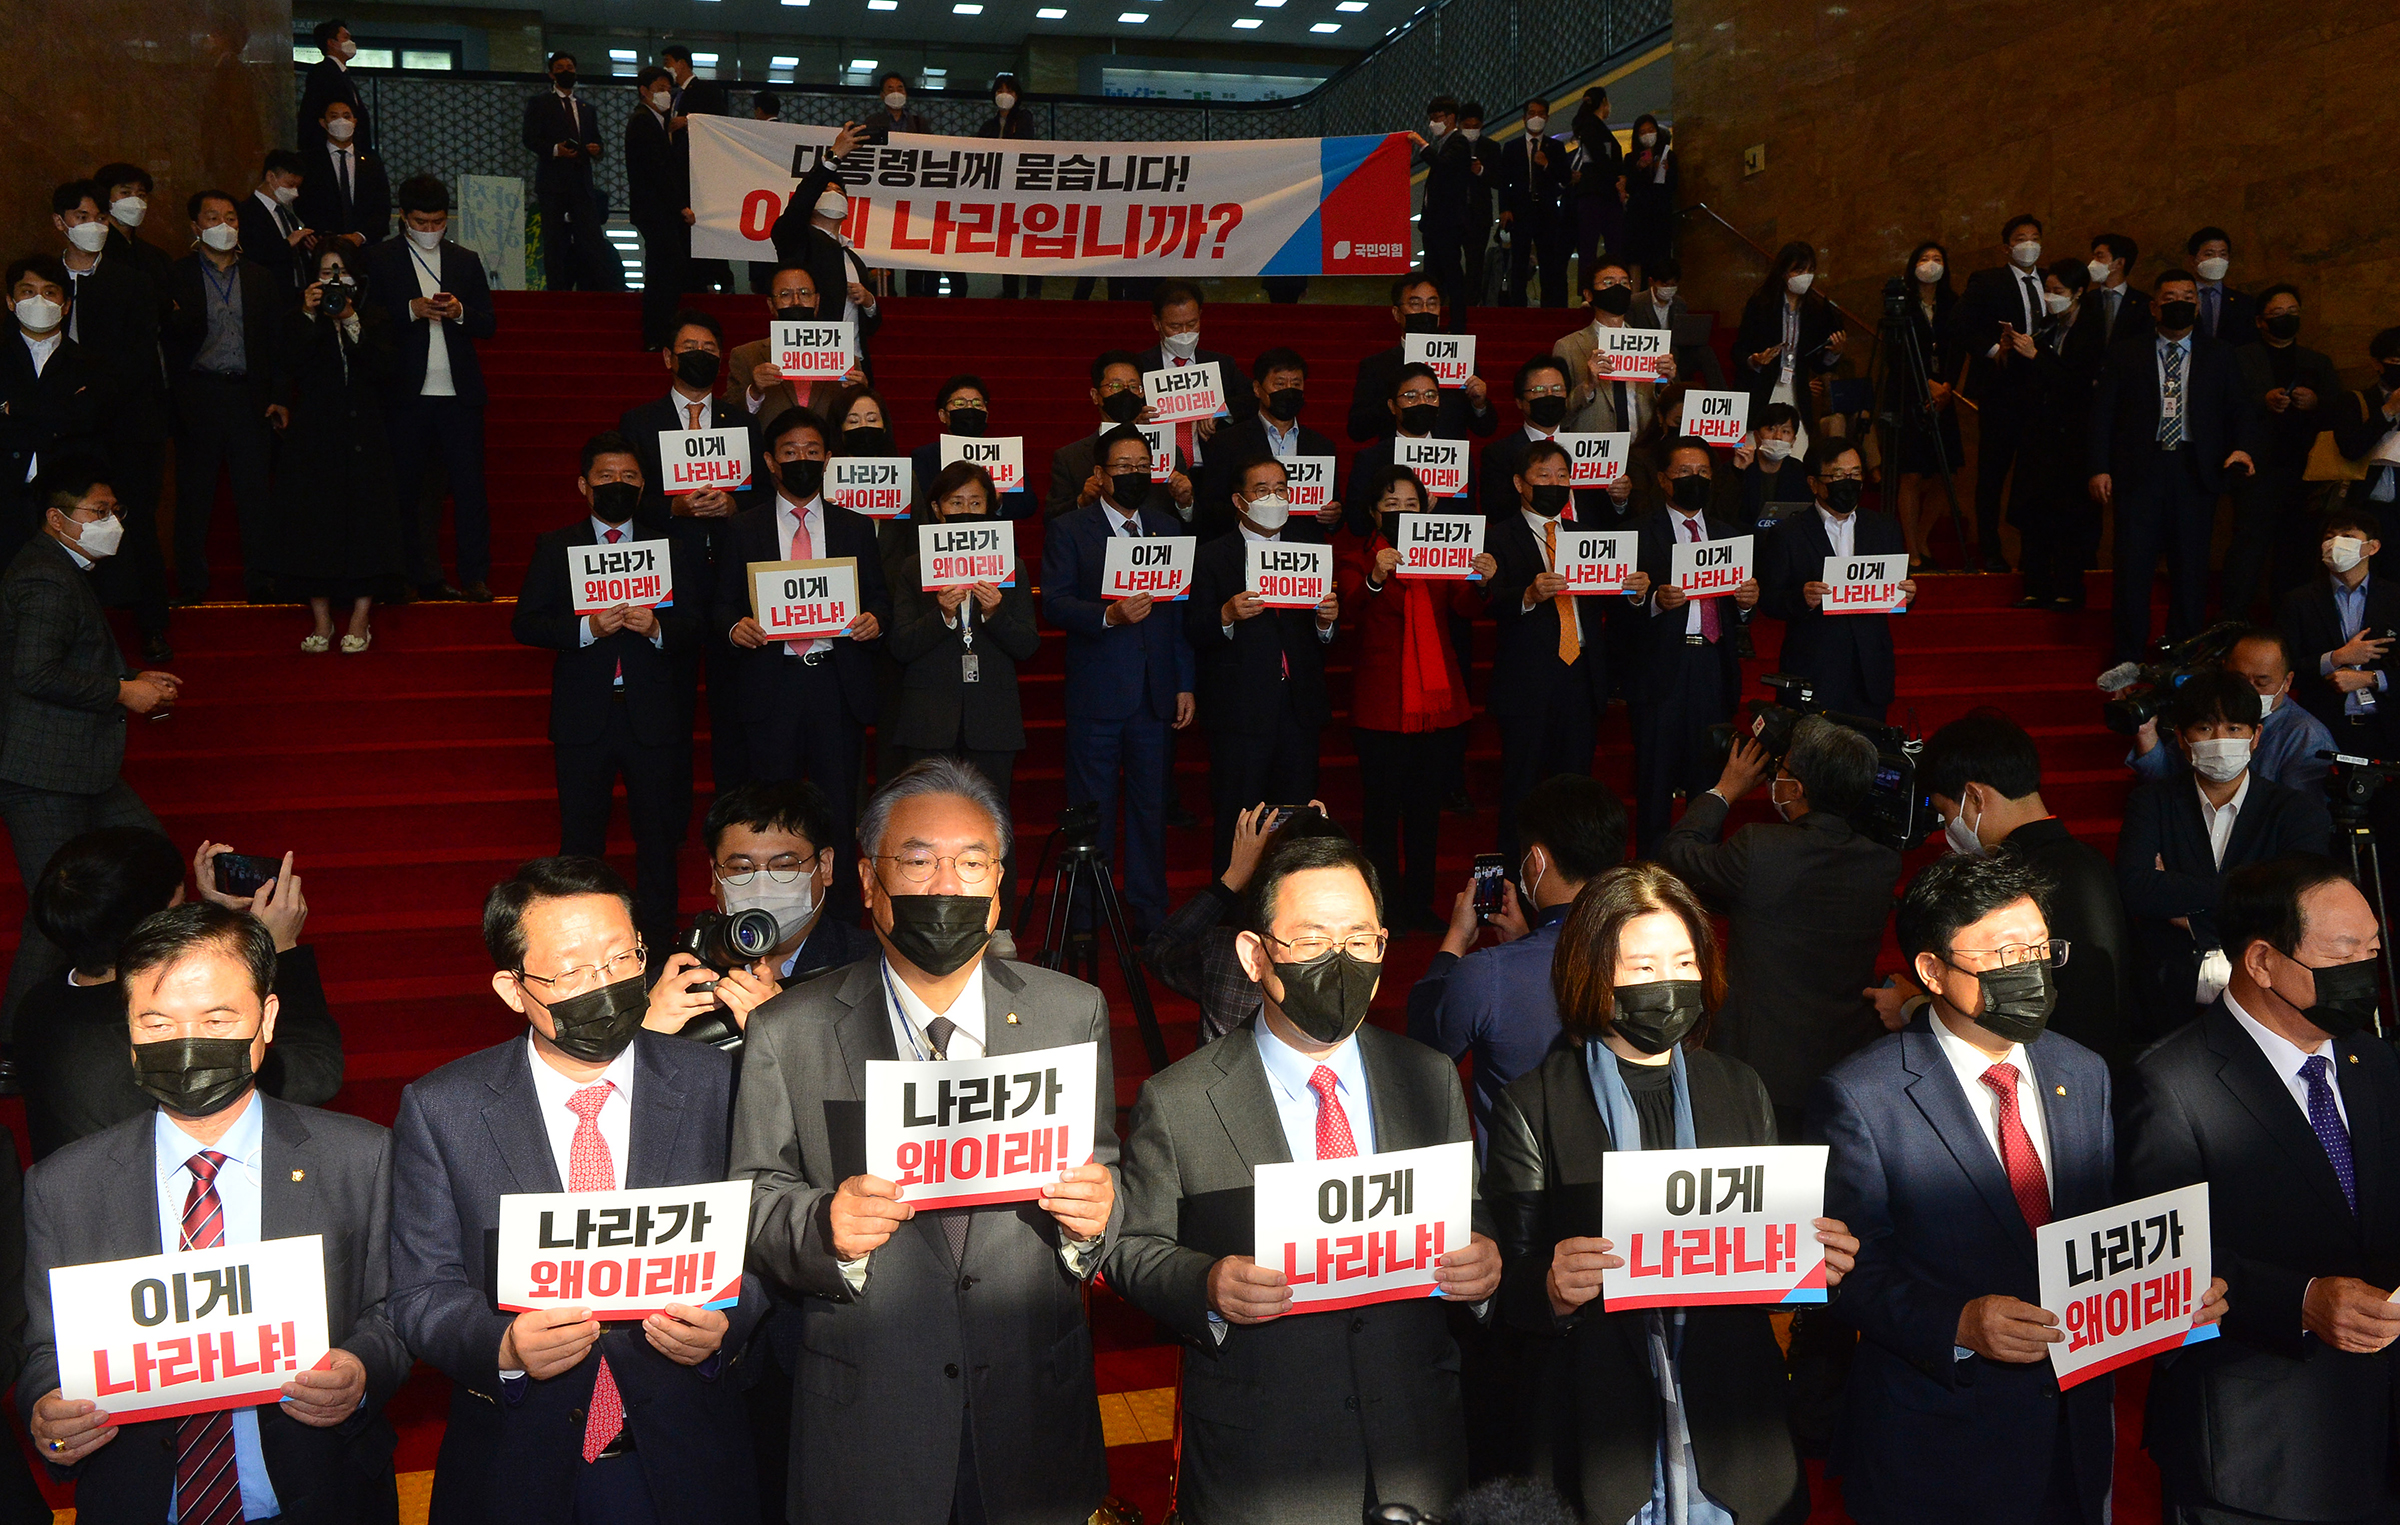 Opposition lawmakers protest against Moon's leadership outside South Korea's National Assembly on Oct. 28, 2020.